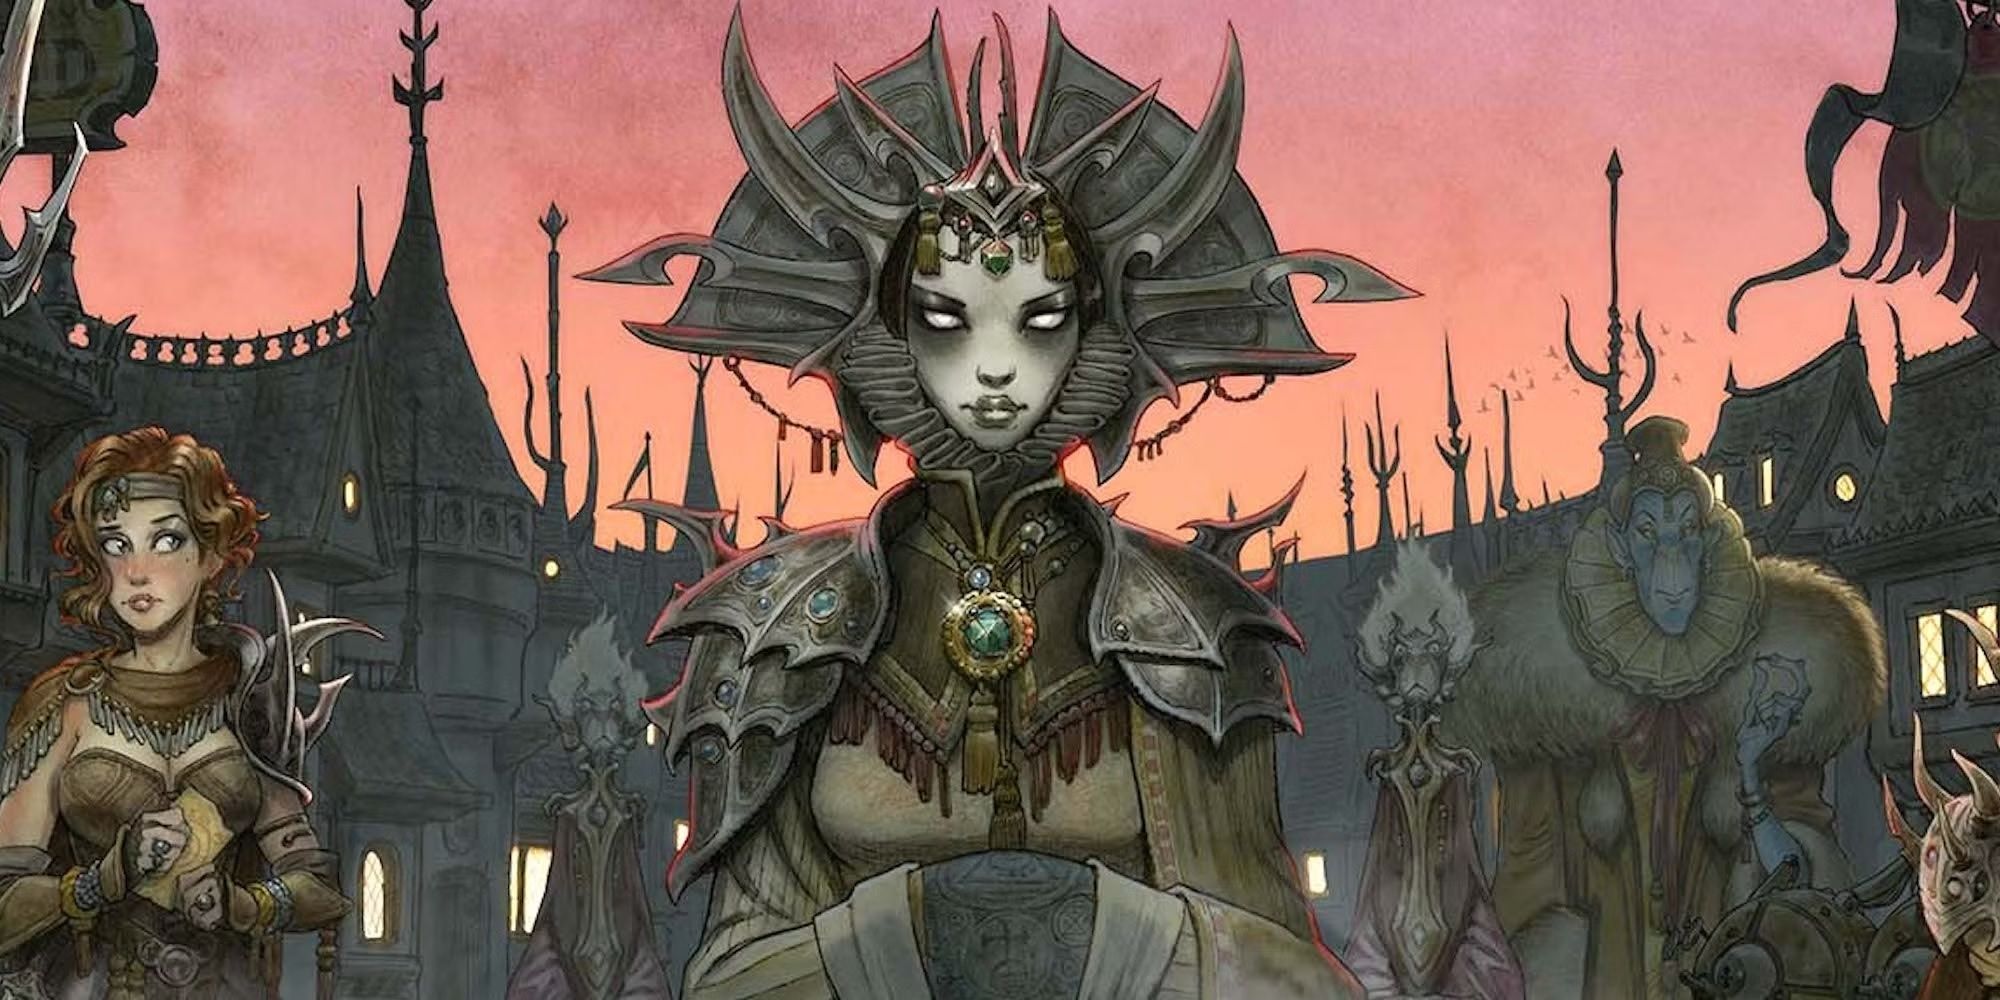 The Dungeons & Dragons Lady of Pain from Planescape walks through town against a red and orange sky - art by Tony DiTerlizzi